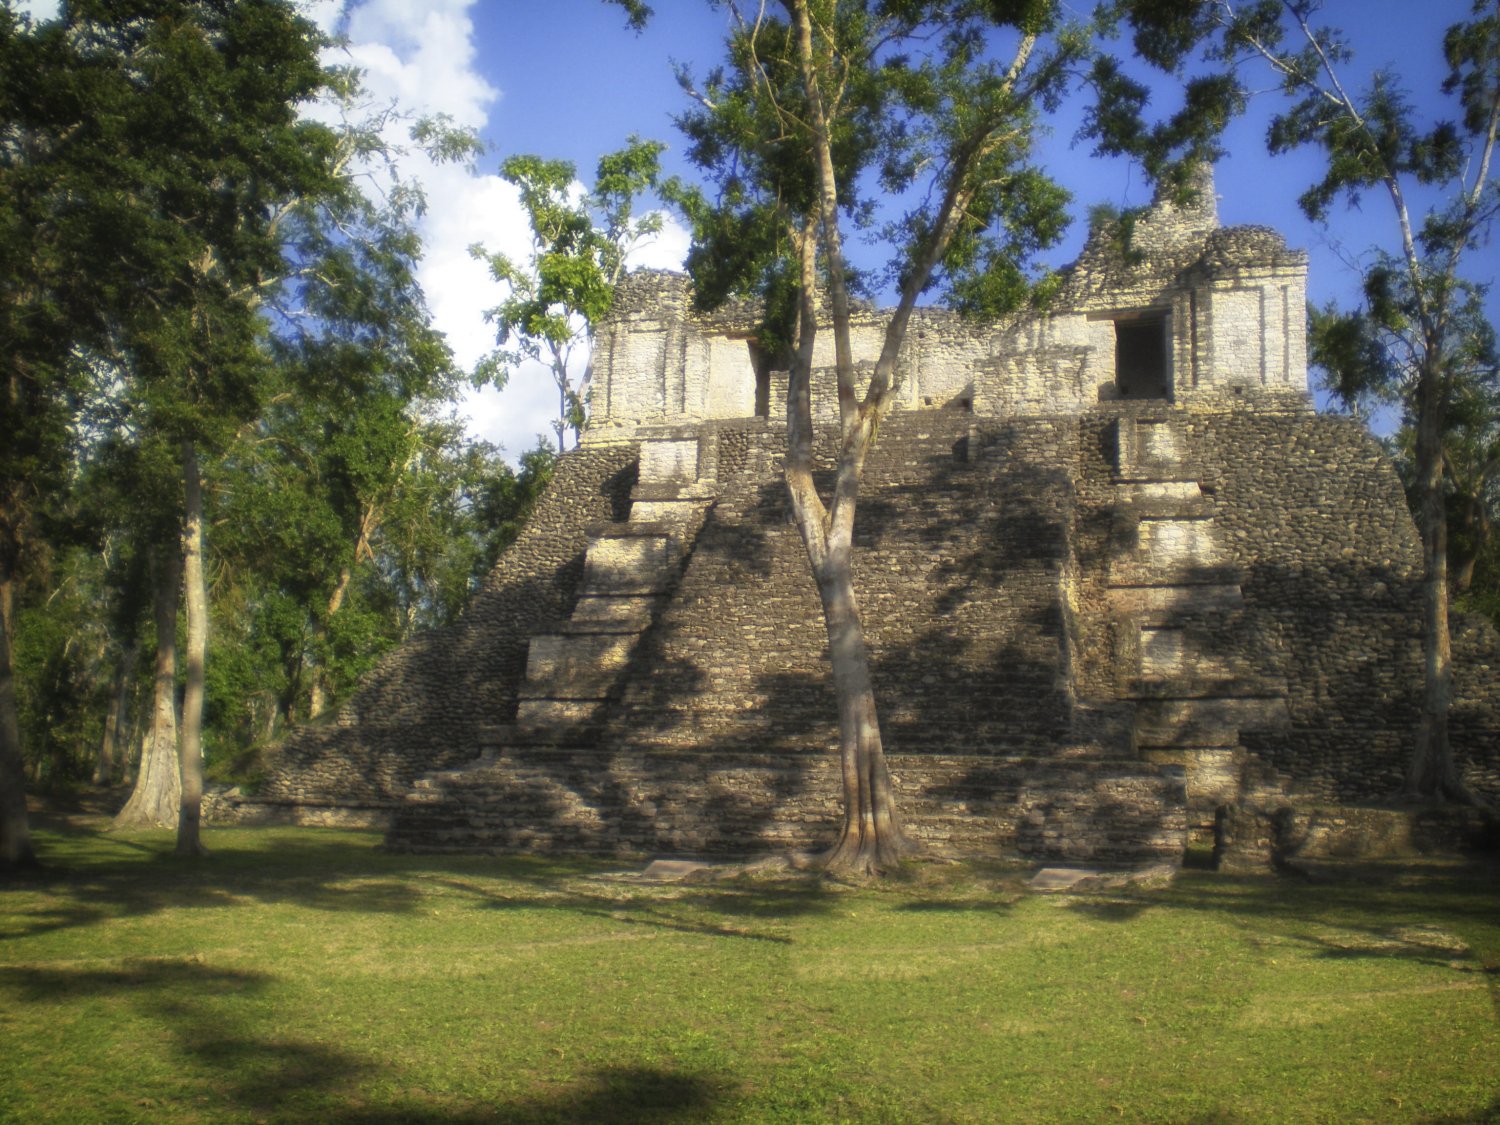 Best Archaeological sites to visit when in Mexico